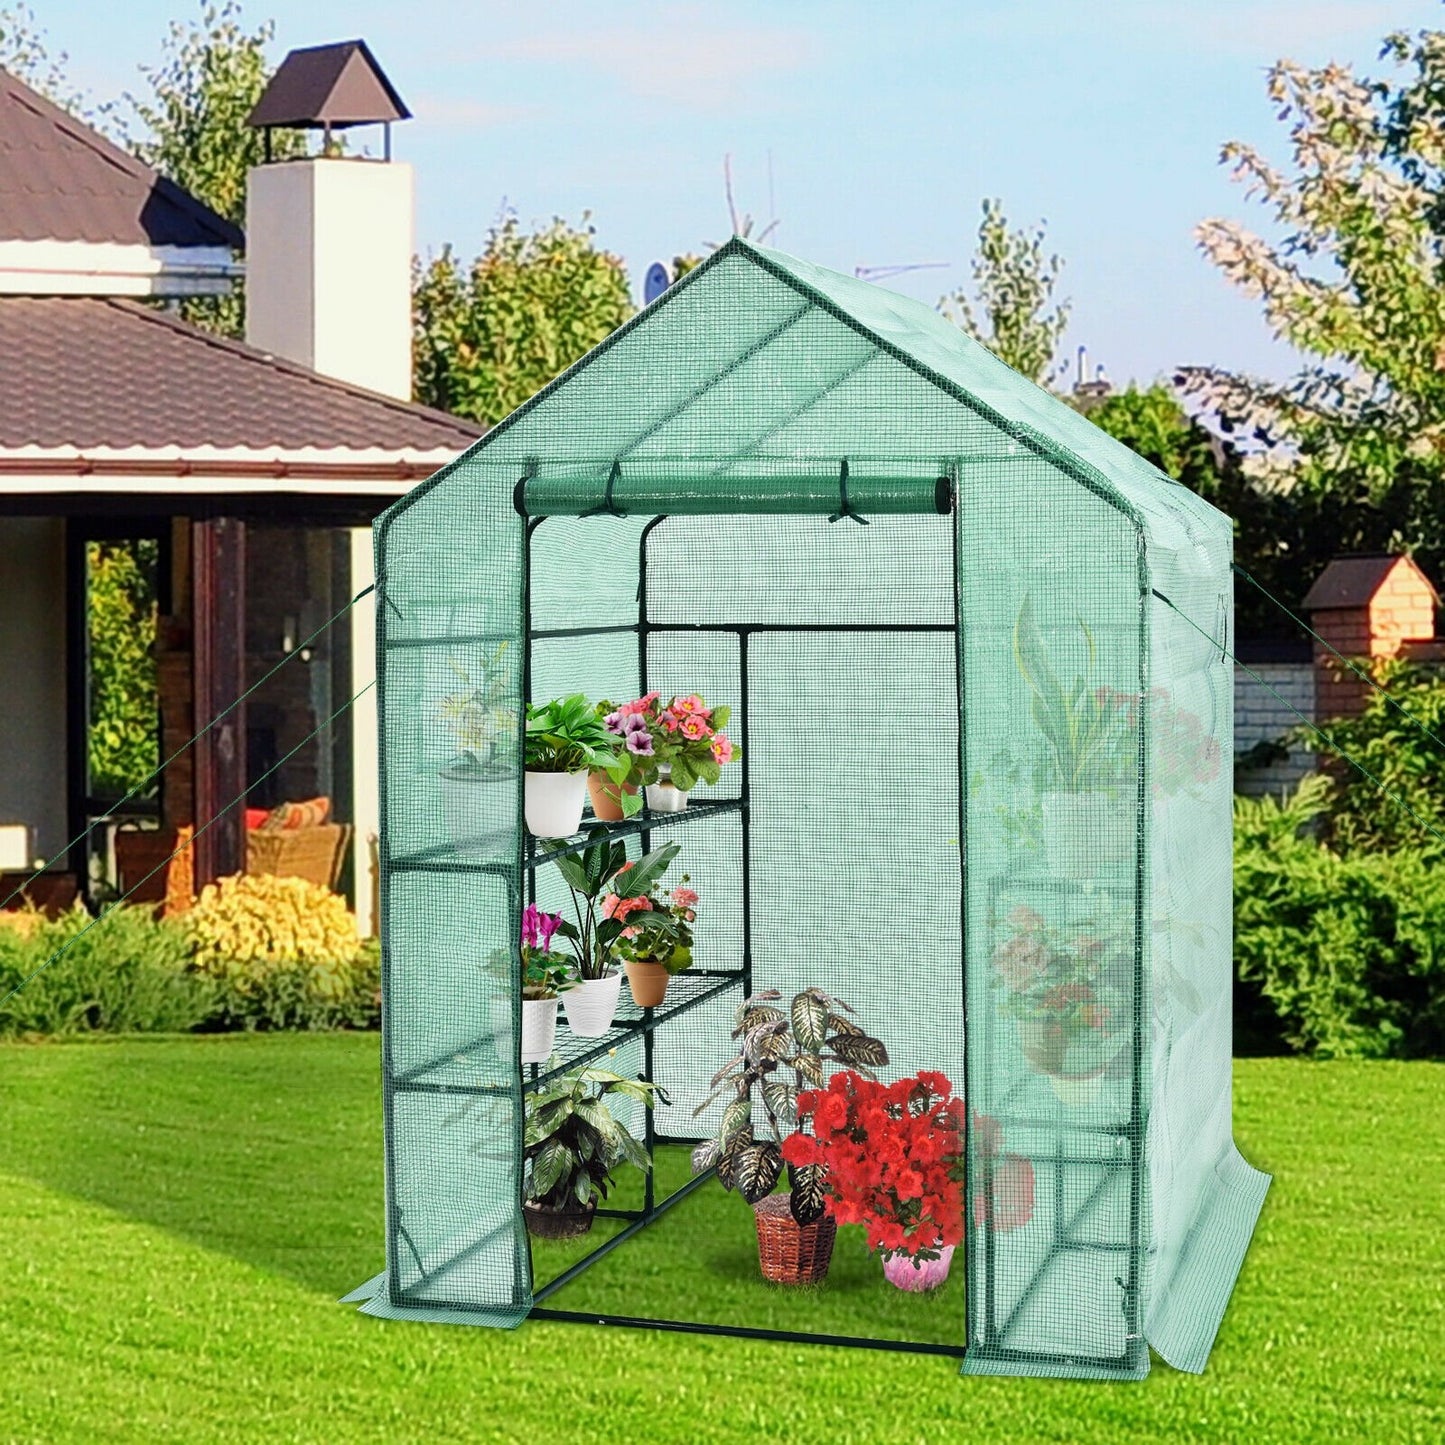 Walk-in Greenhouse 56 x 56 x 77 Inch Gardening with Observation Windows, Green at Gallery Canada